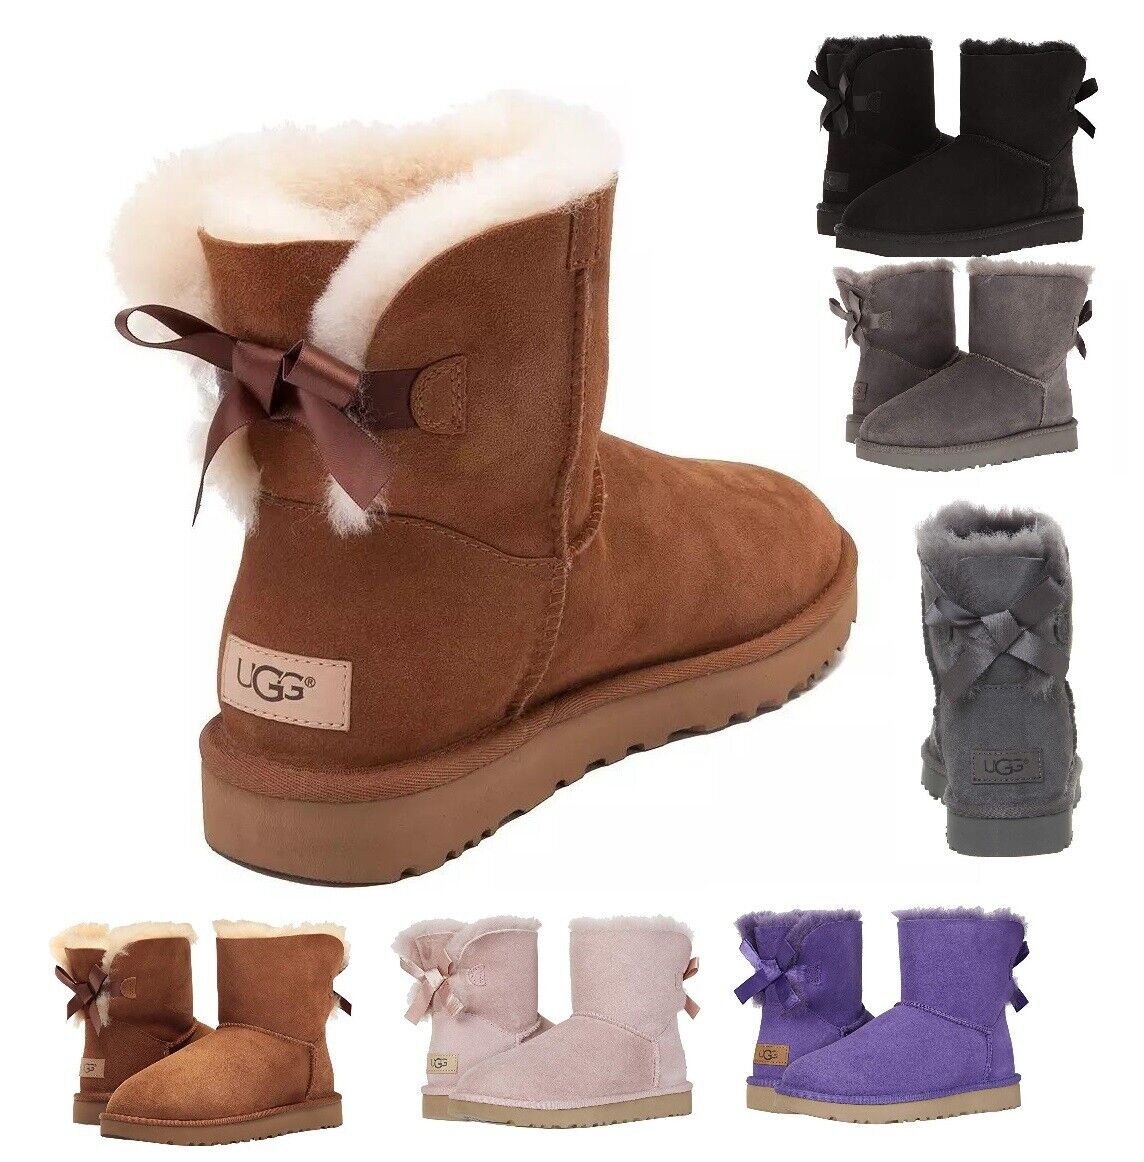 Authentic UGG Women's Shoes Mini Bailey Bow Boot Chestnut Black Grey Pink New UGG Mini Bailey bow